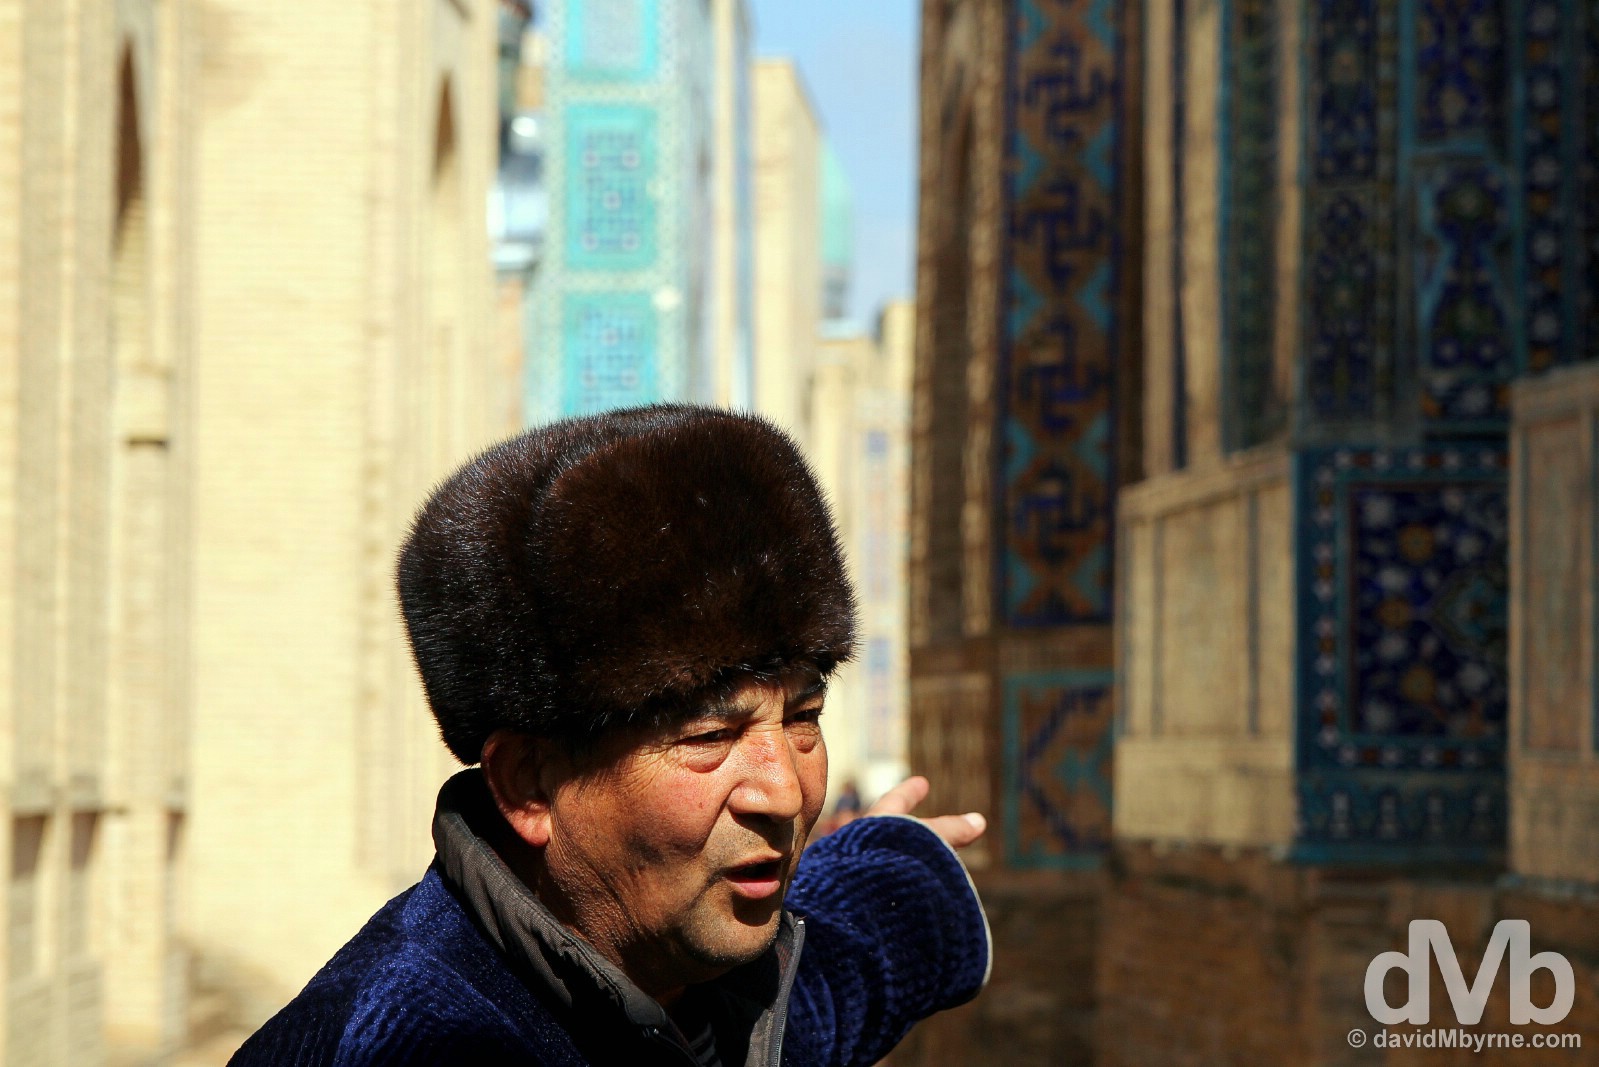 Pointing out detail at the Shah-i-Zinda, the Avenue of Mausoleums, in Samarkand, Uzbekistan. March 8, 2015. 